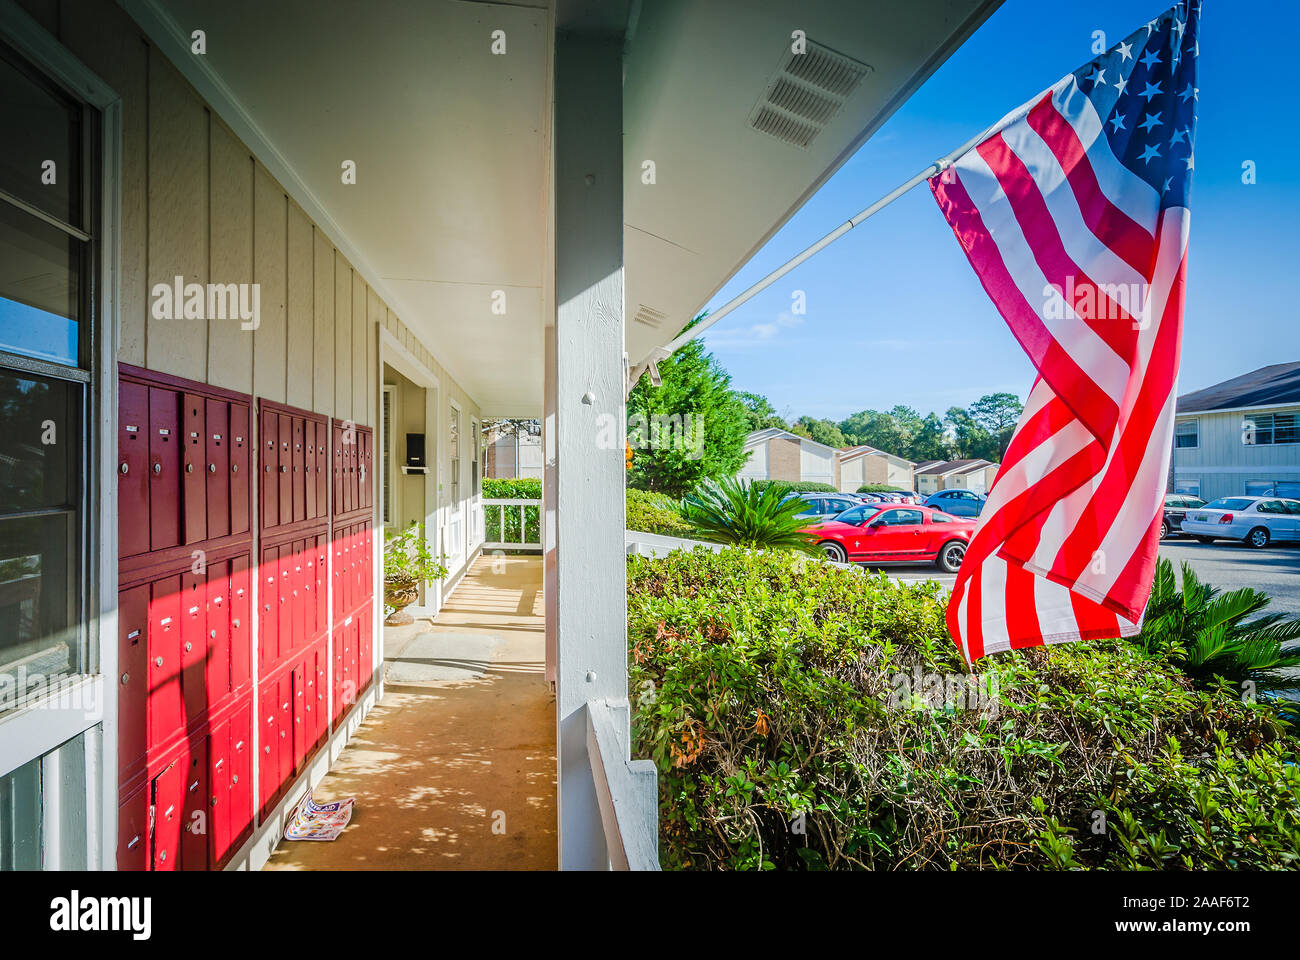 The office at Four Seasons apartments is pictured with mailboxes in Mobile, Alabama. The apartment complex is managed by Sealy Management Company. Stock Photo